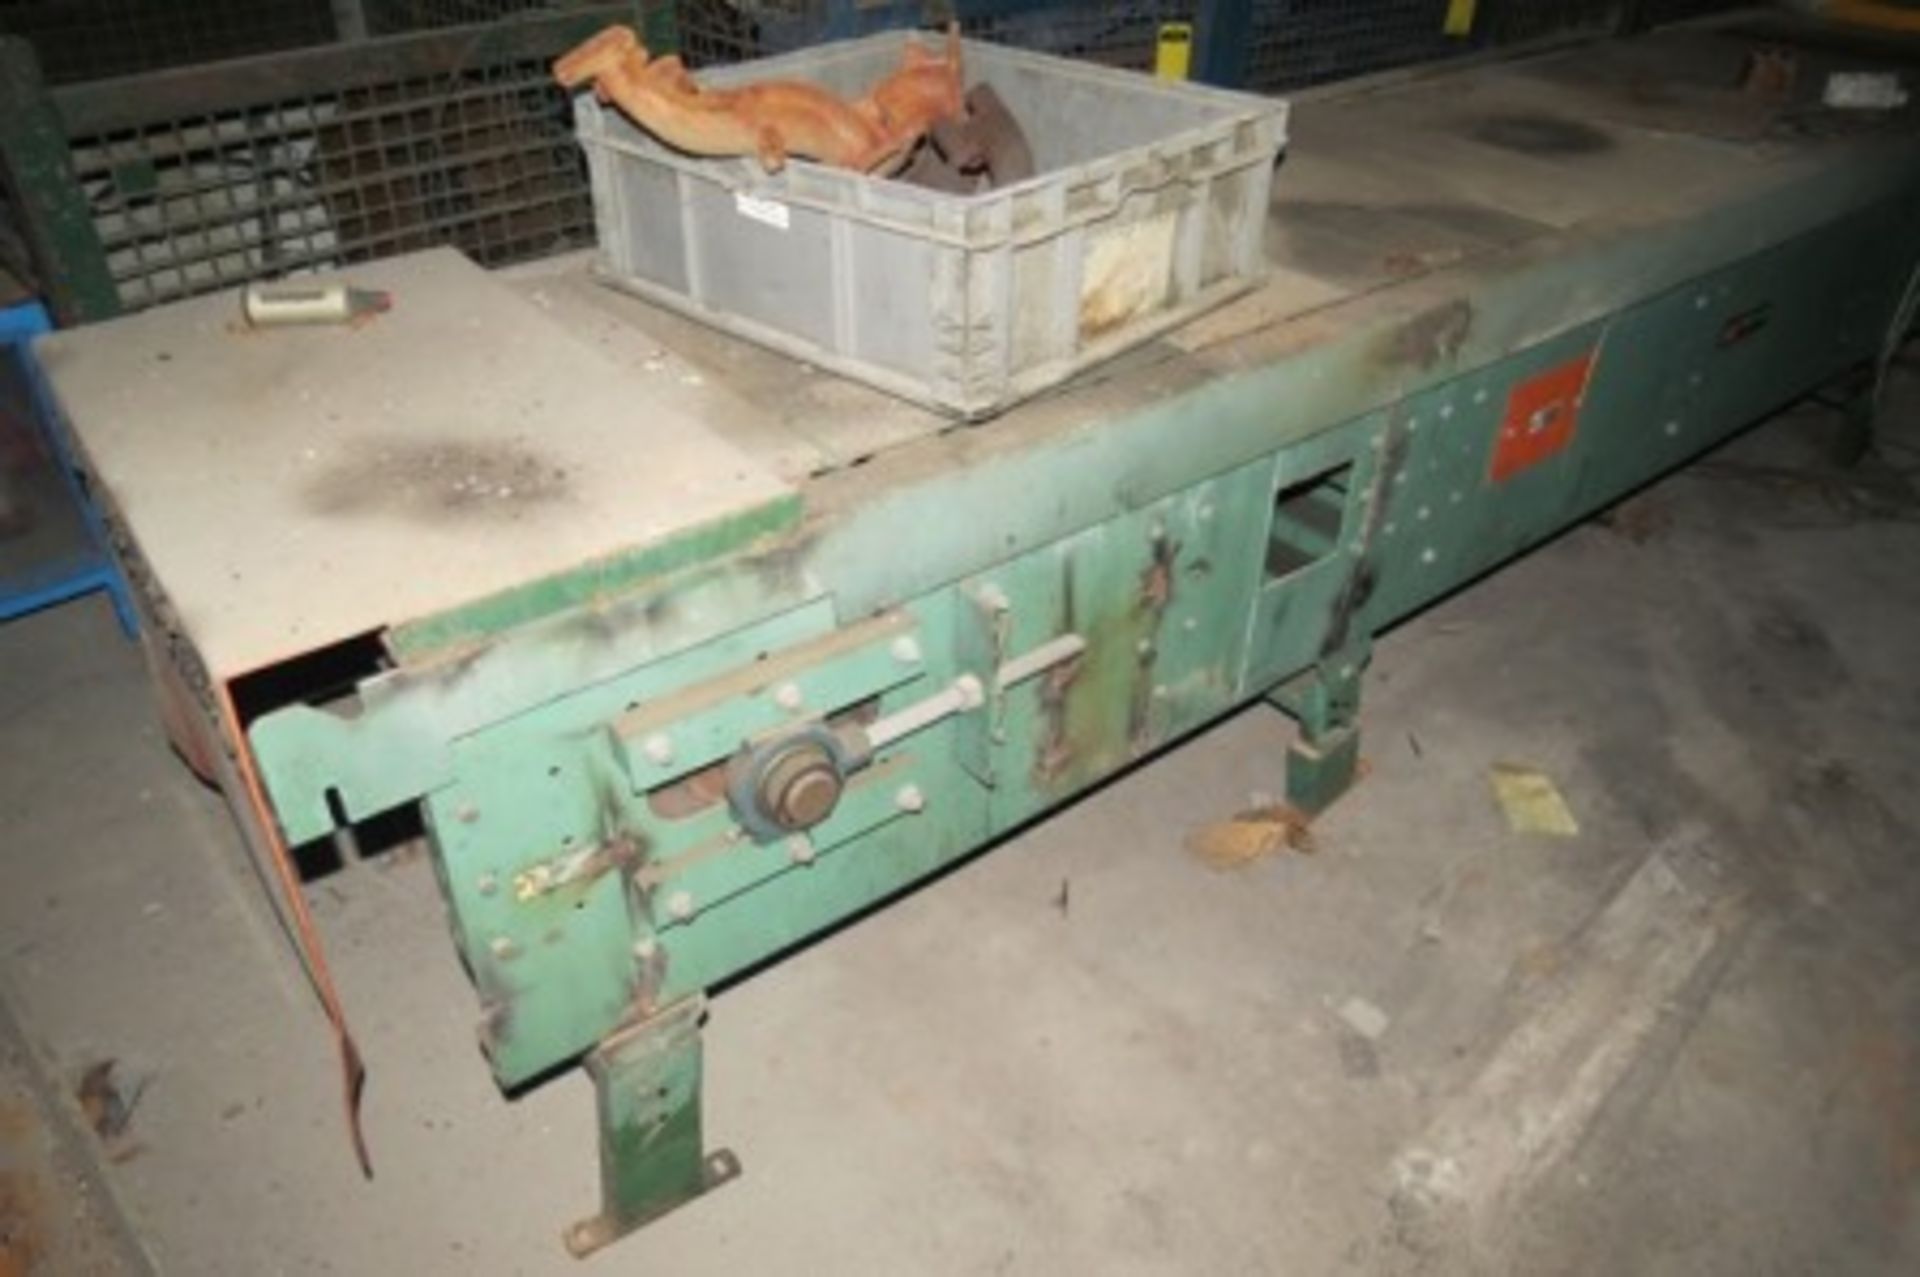 Electric motor 50 hp. Spare parts for die casting machines. Belt conveyor - Image 14 of 19